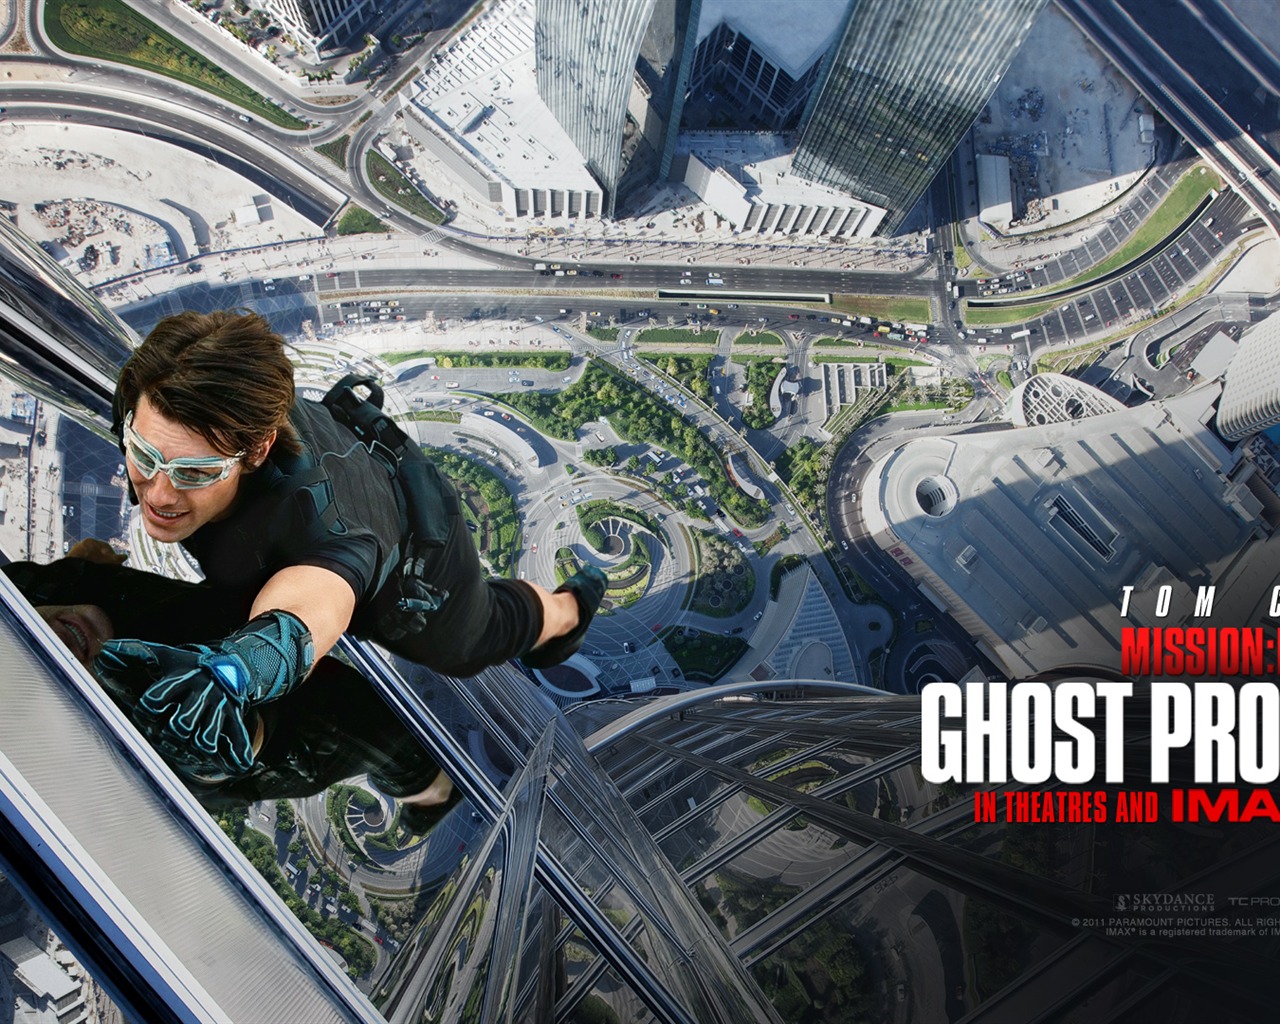 Mission: Impossible - Ghost Protocol 碟中谍4 高清壁纸10 - 1280x1024